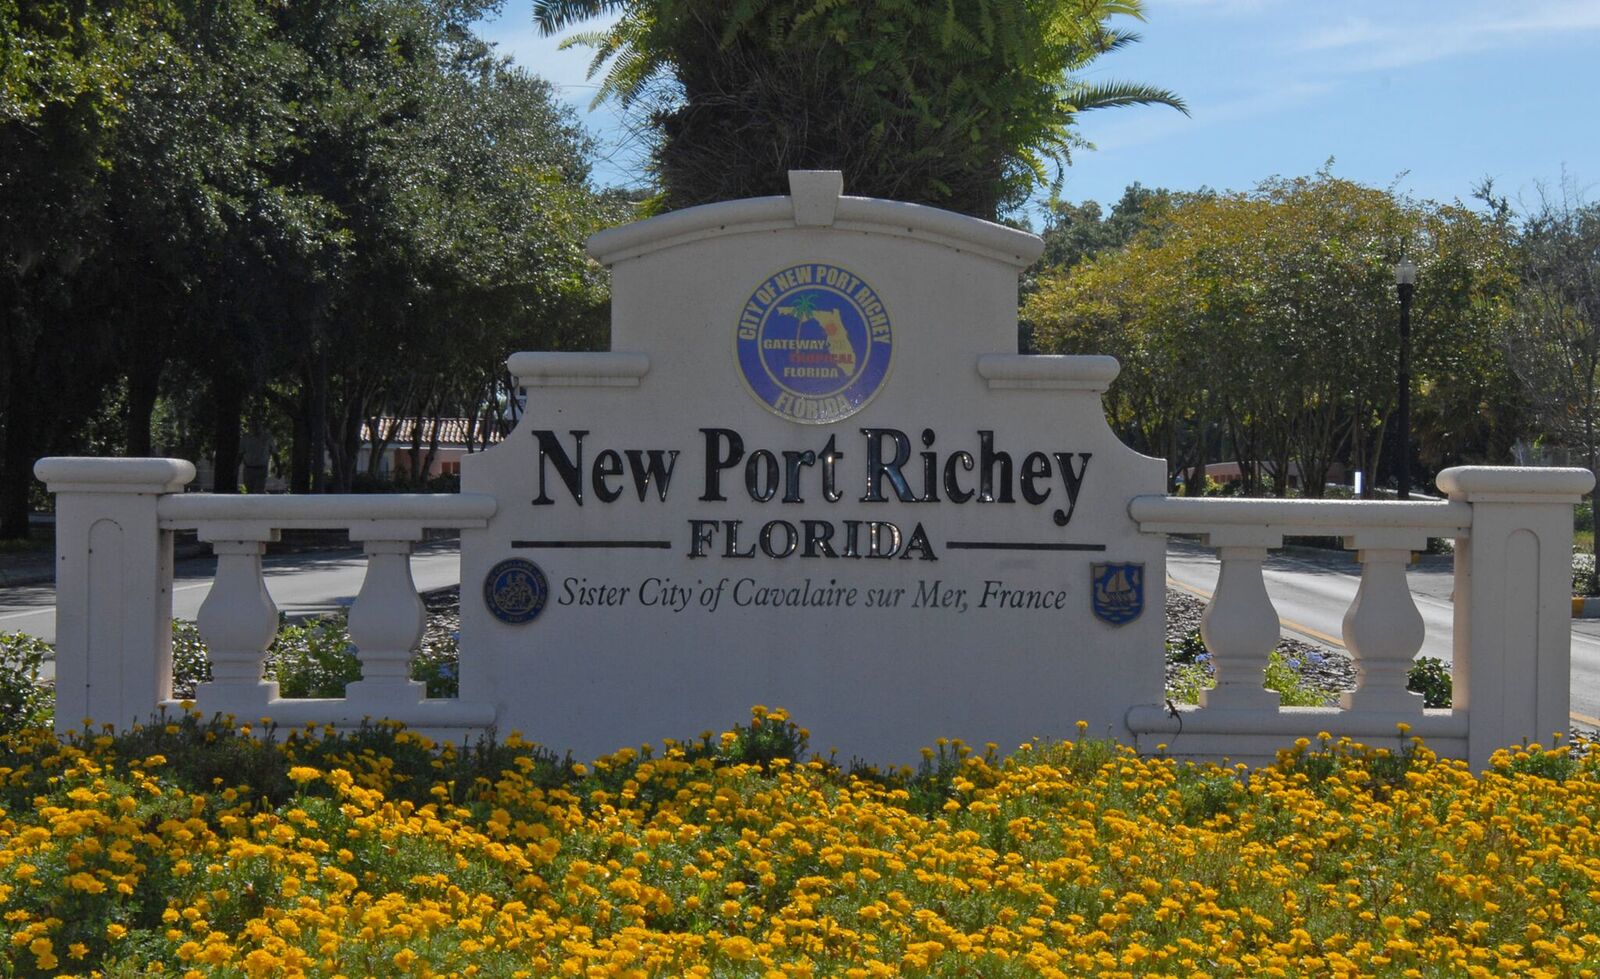 White Arched sign with the City of New port Richey seal, reading New Port Richey Florida. in front of a large palm tree. To the right you can see a silver car and a grey car going over a bridge.